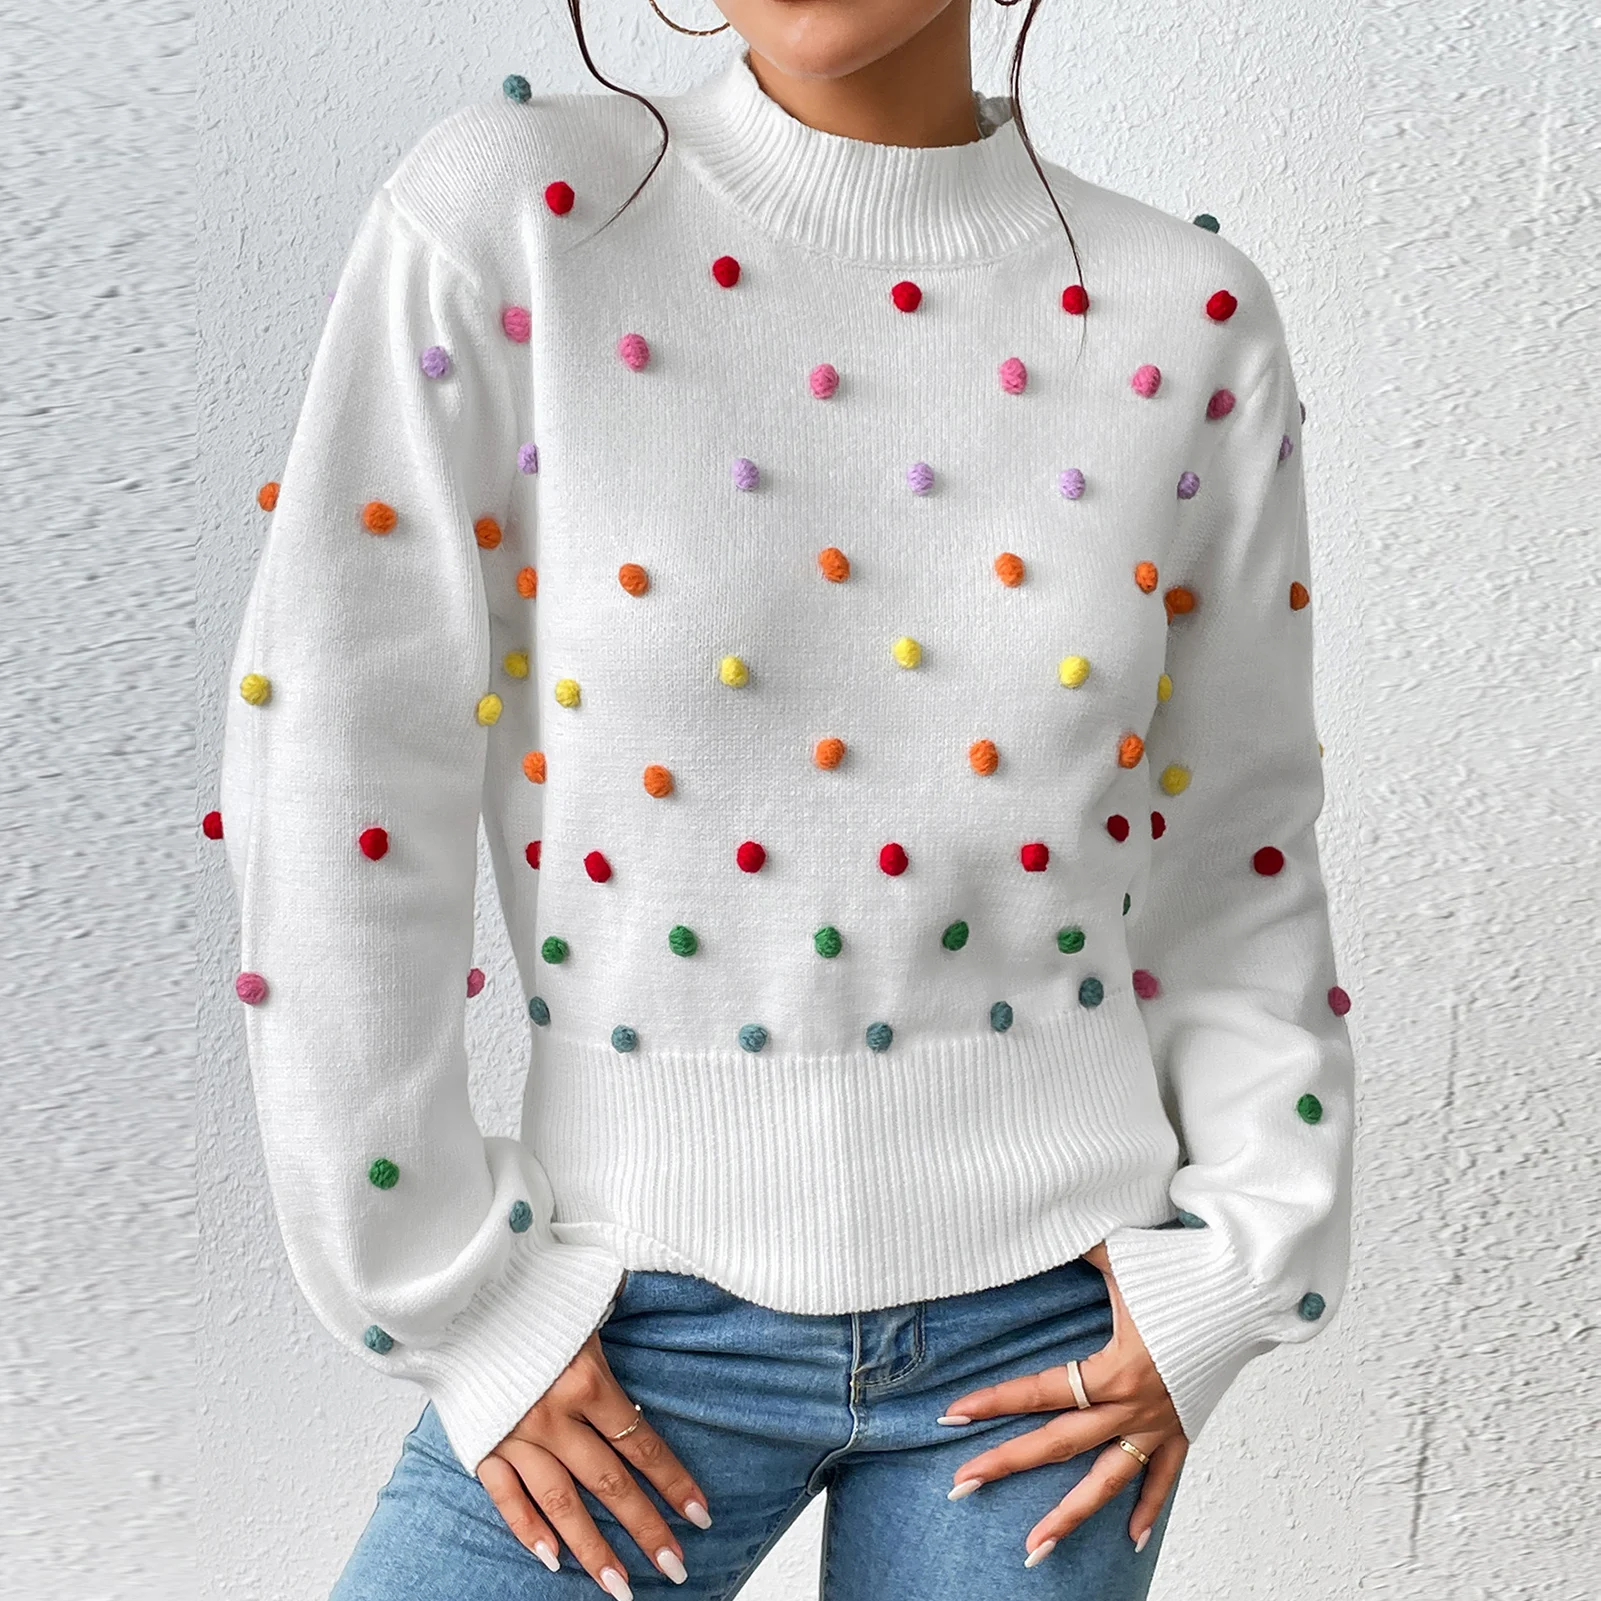 

Loose Fit Slight Strech Cute Style Women Rainbow Pom Pom Pullover Casual Knitted Pullovers Jumper Tops Knit Tops Streetwear